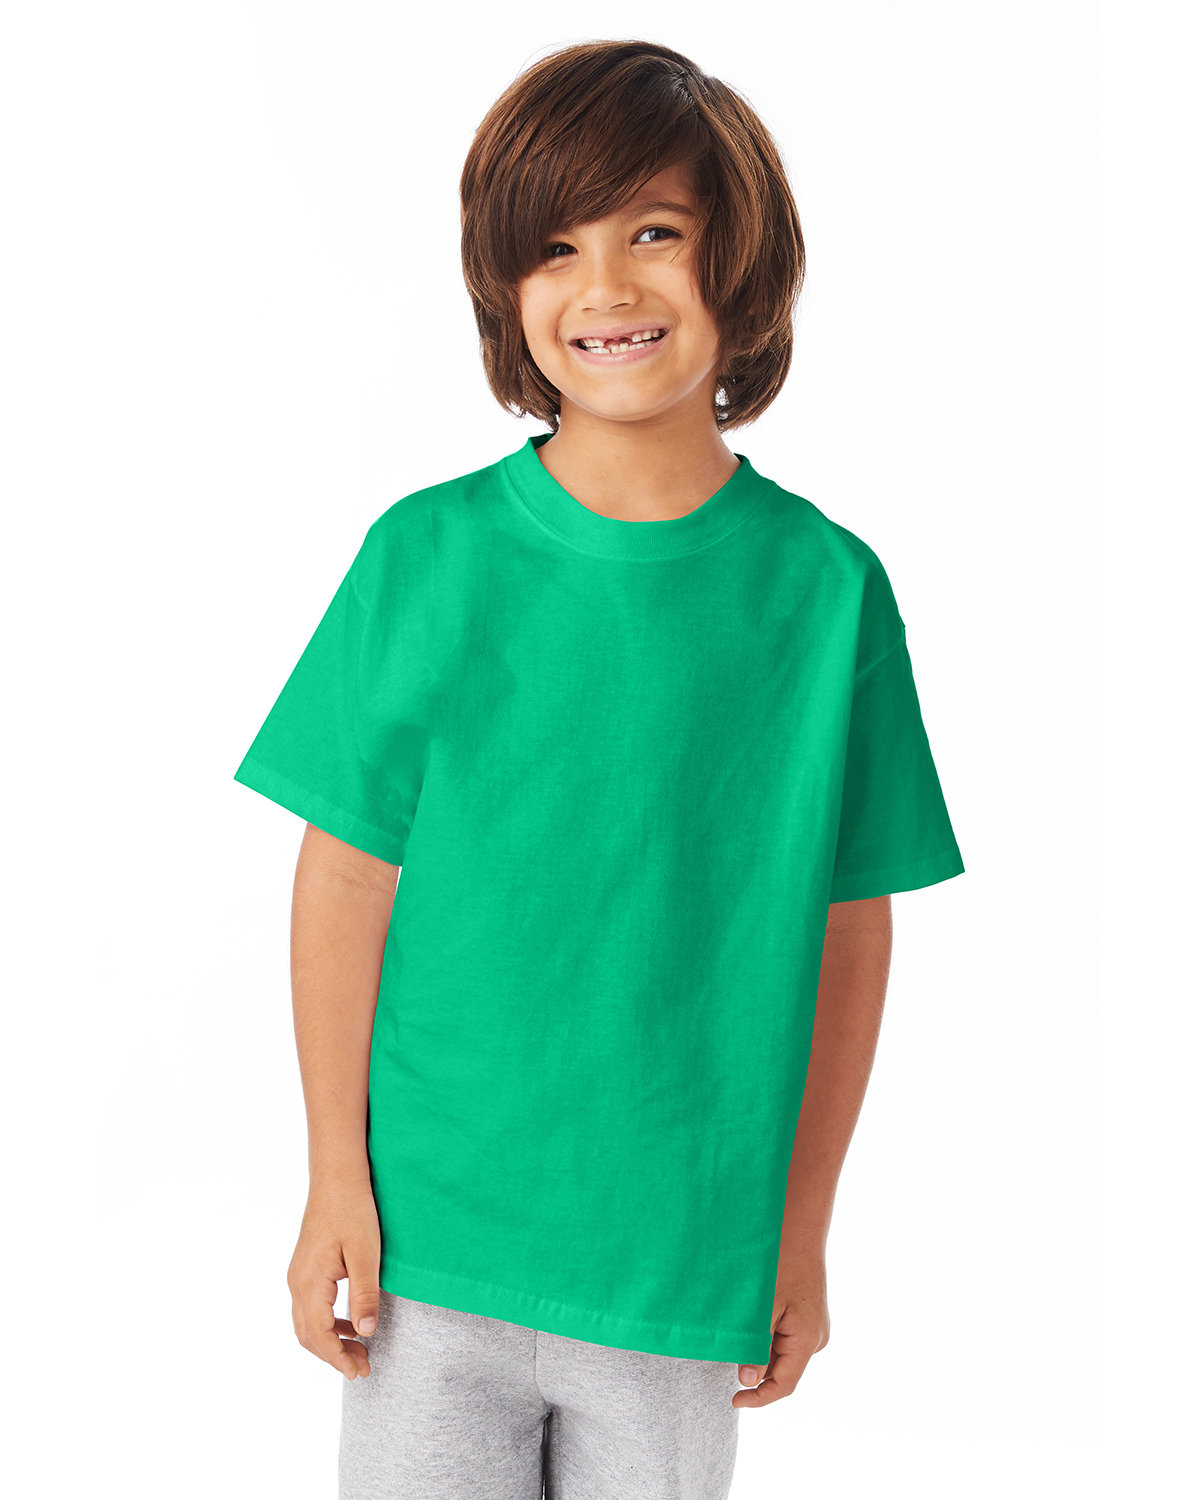 Hanes Youth Authentic-T T-Shirt KELLY 